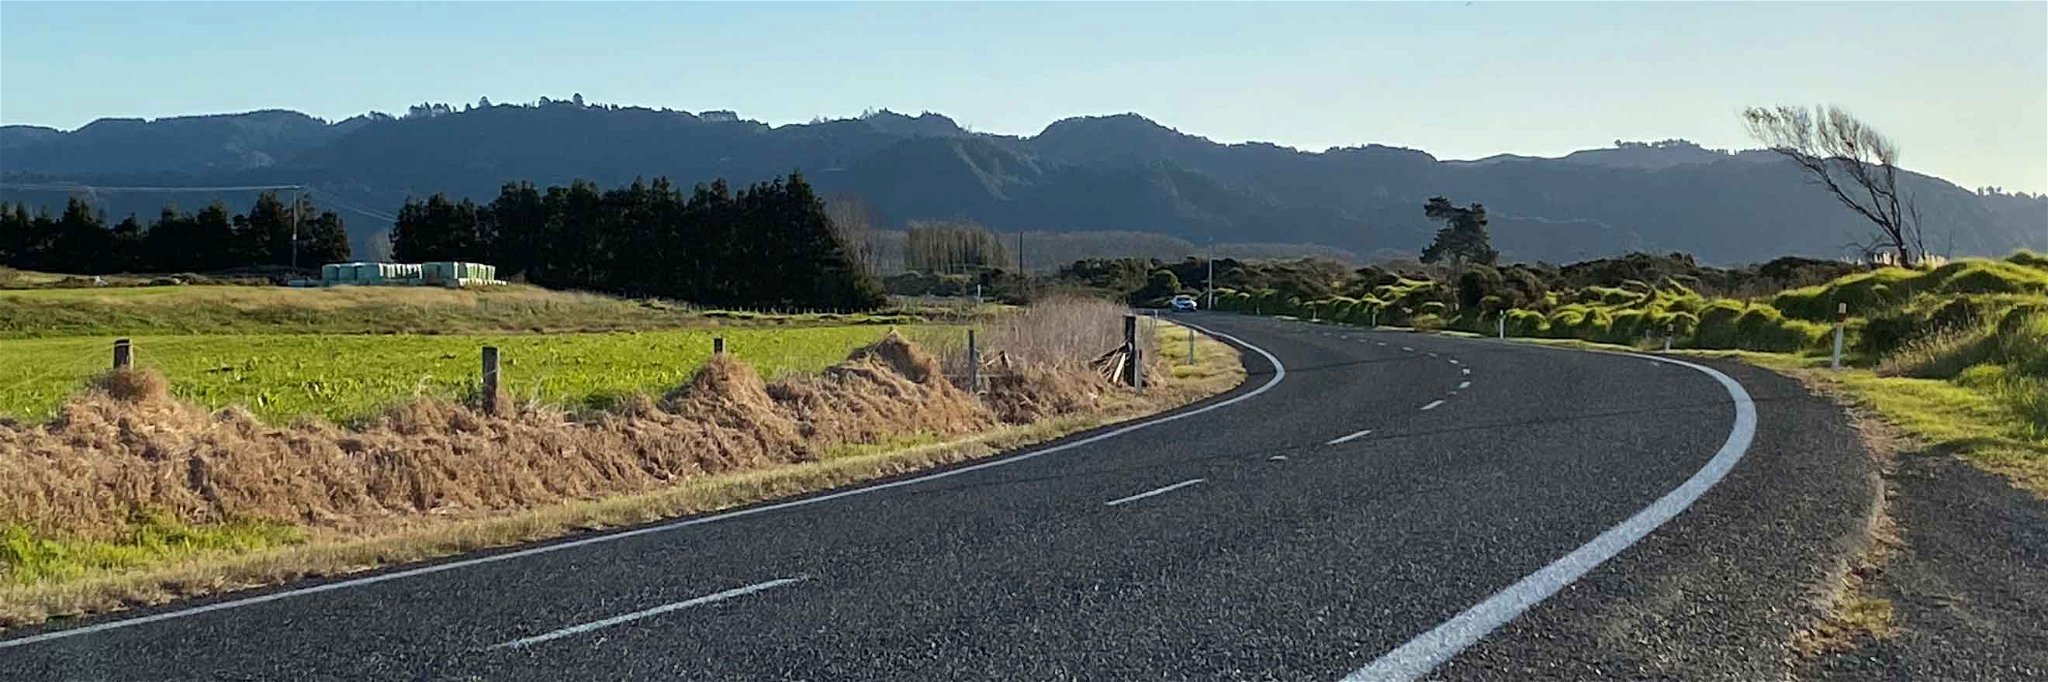 Rex Pickett hits the road in New Zealand.